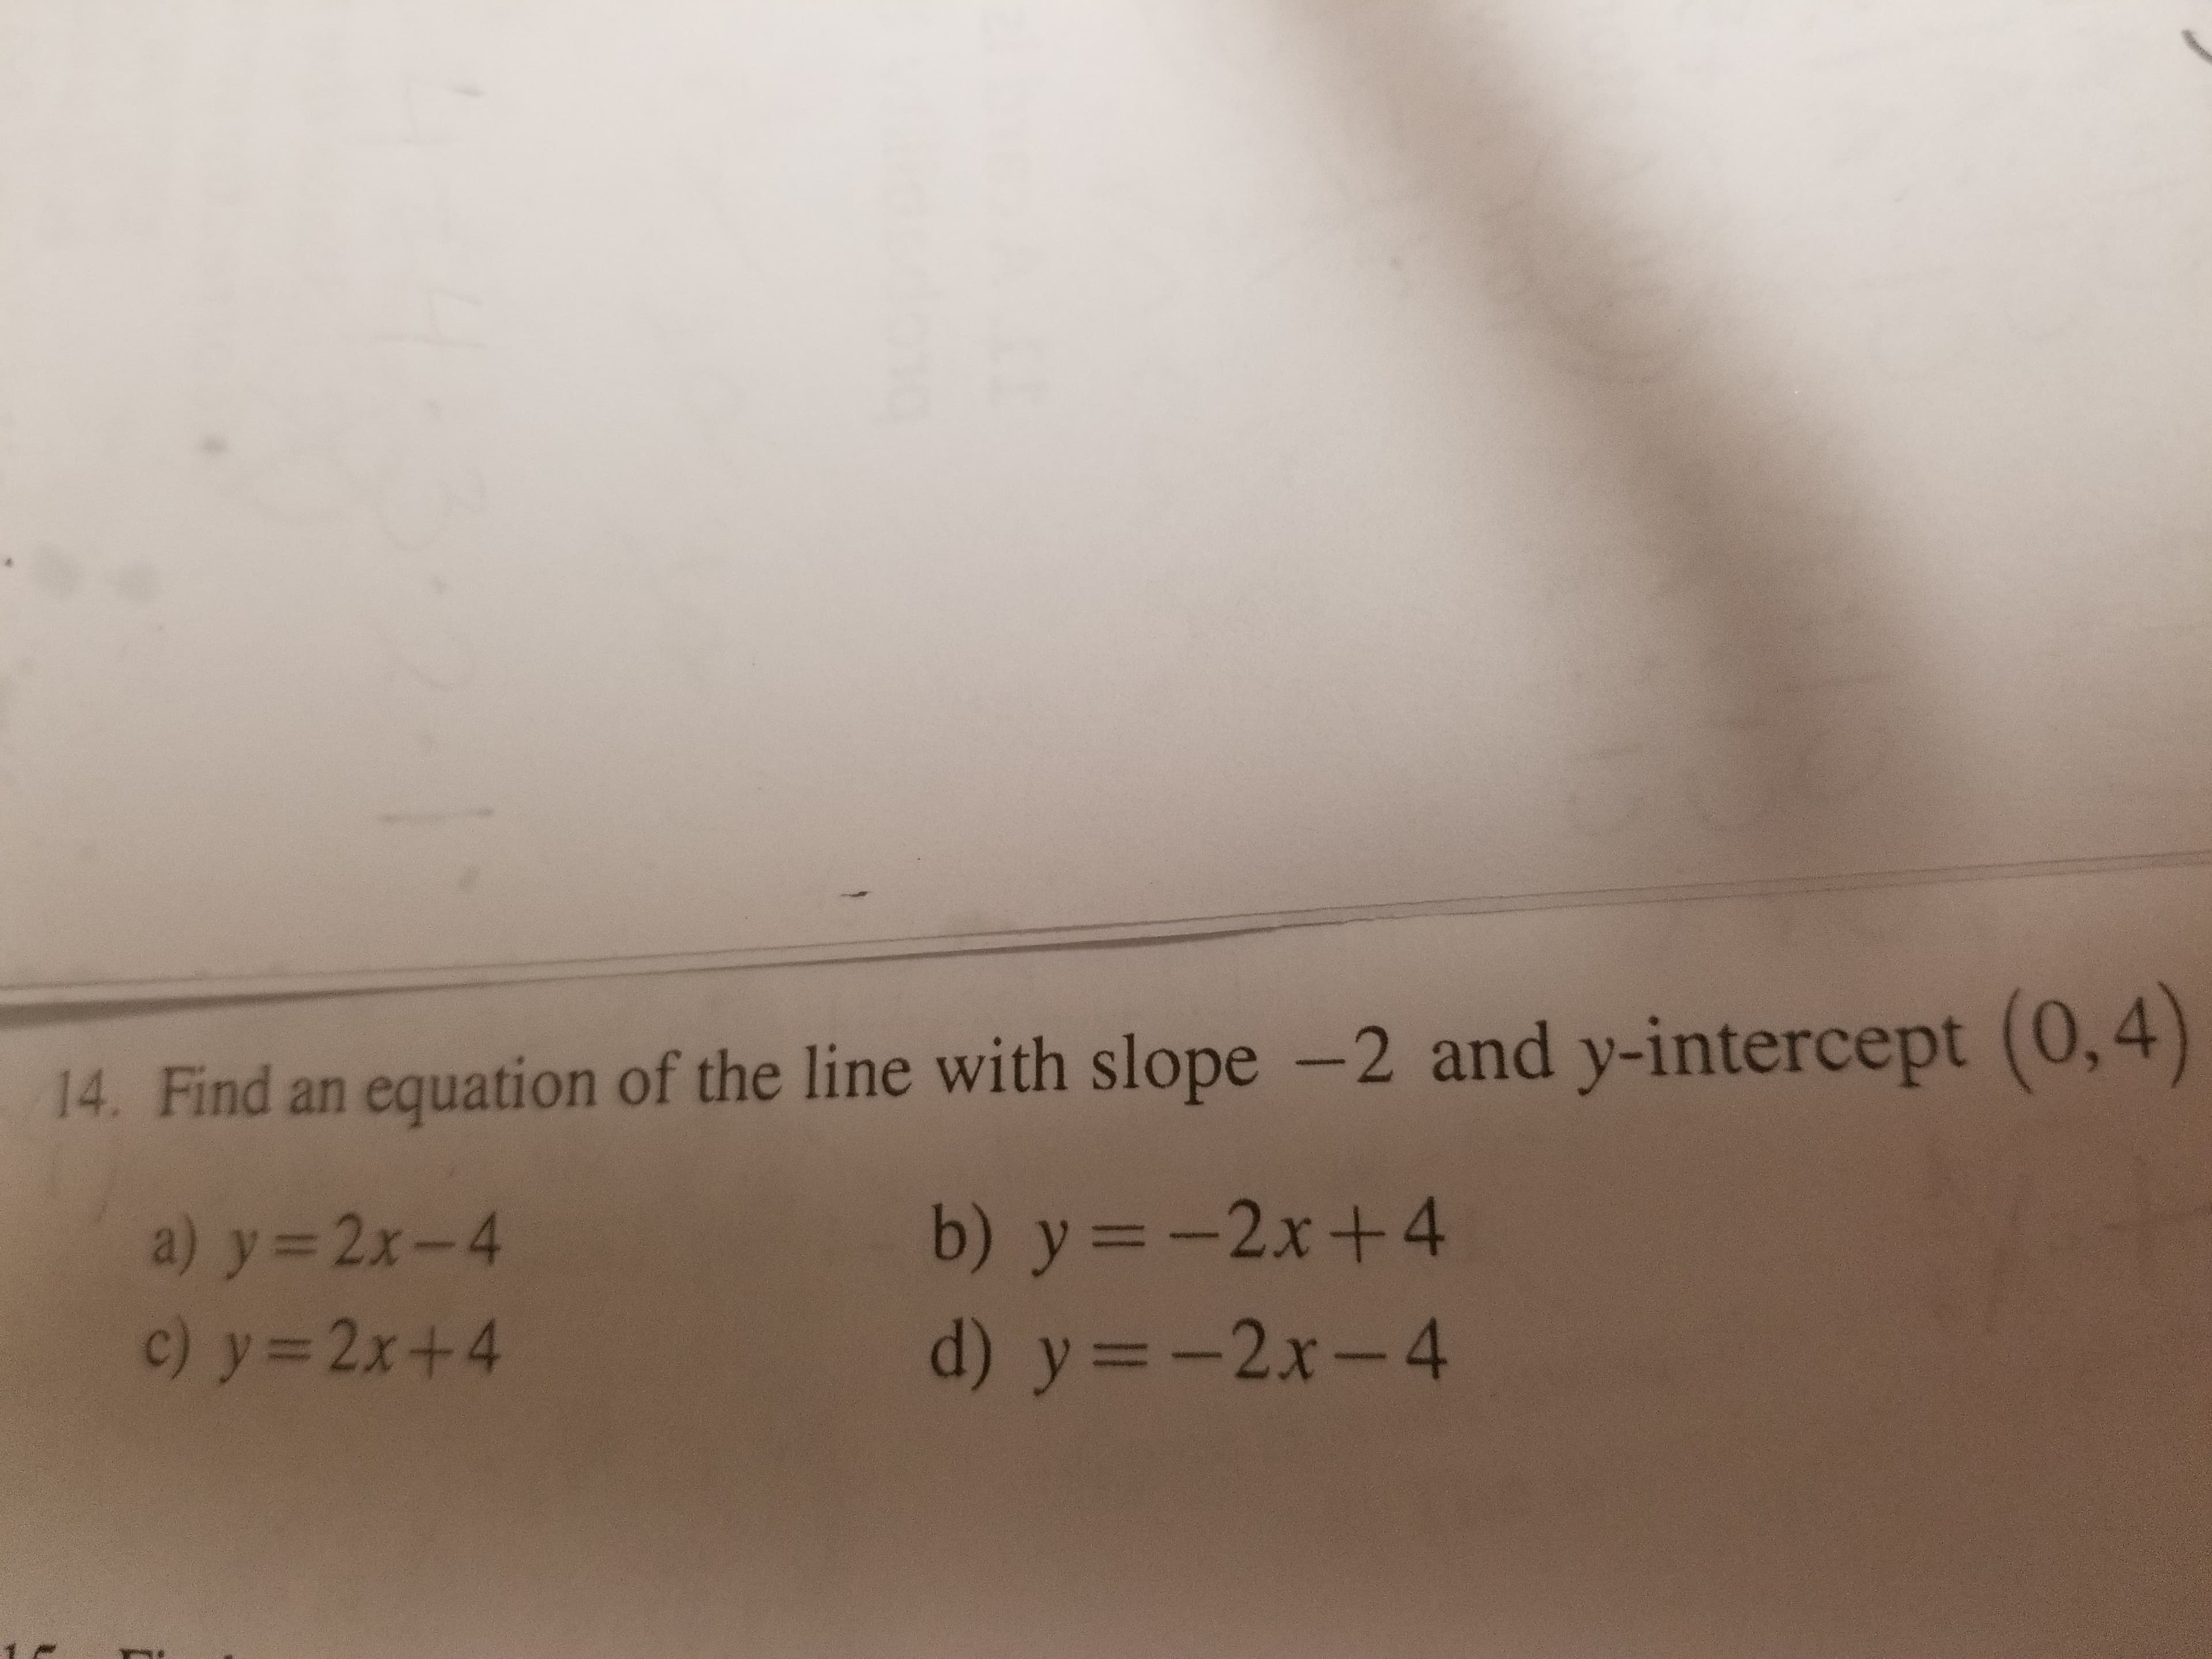 14. Find an equation of the line with slope -2 and y-intercept (0,4)
b) y- -2x+4
d) y--2x-4
a) y-2x-4
c) y-2x+4
